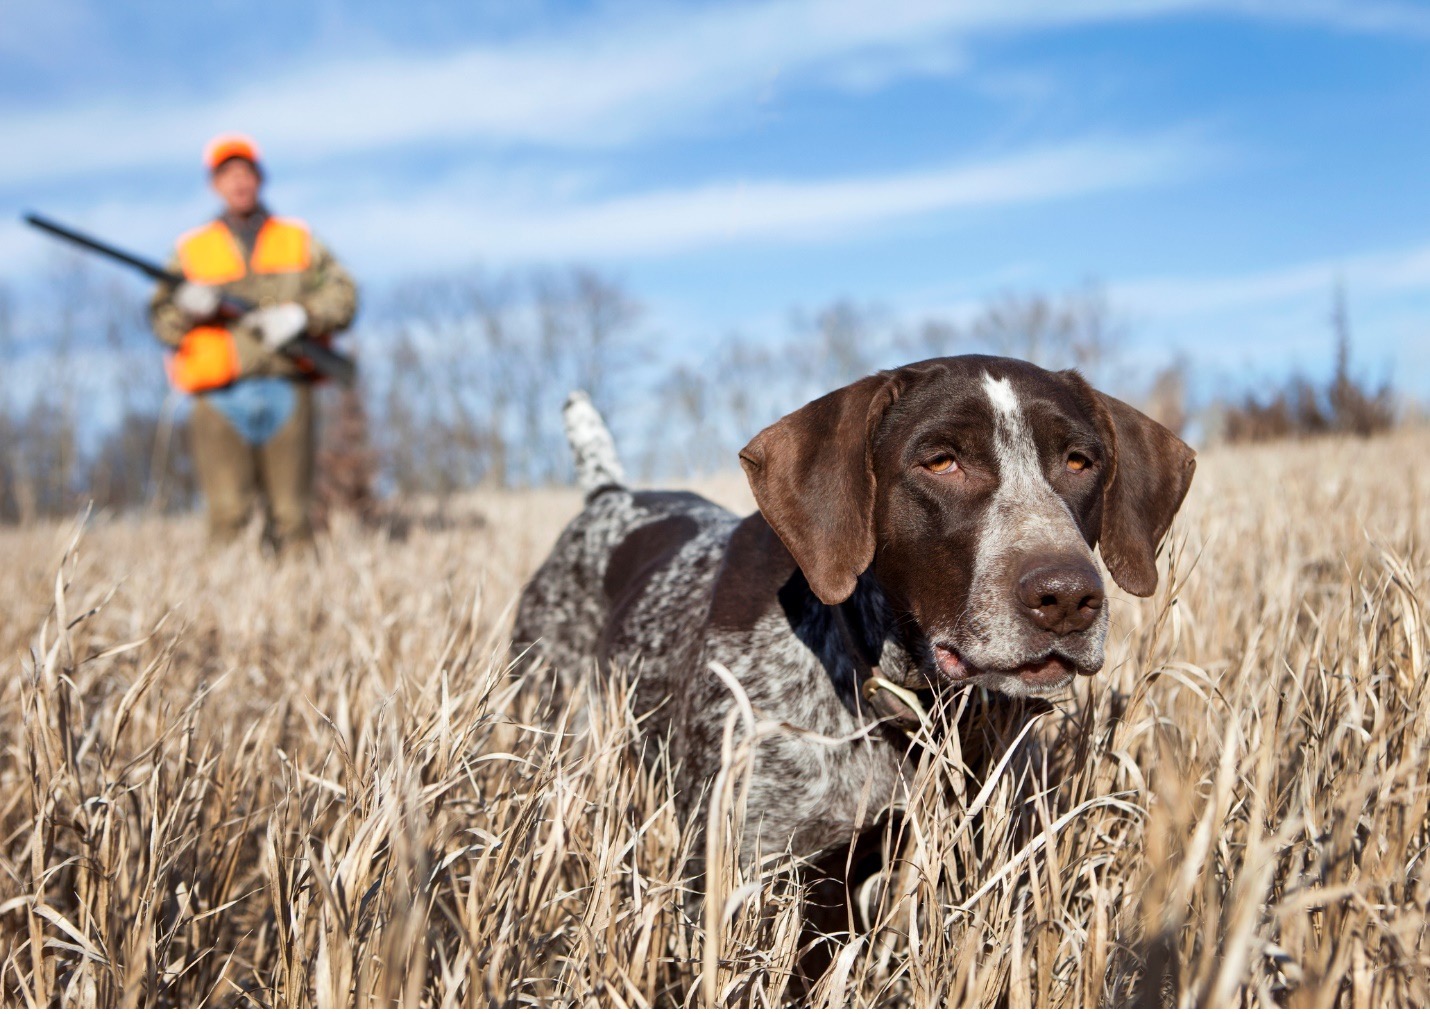 Fido in the Blind: Tips for Managing a Hunting Dog in the Blind